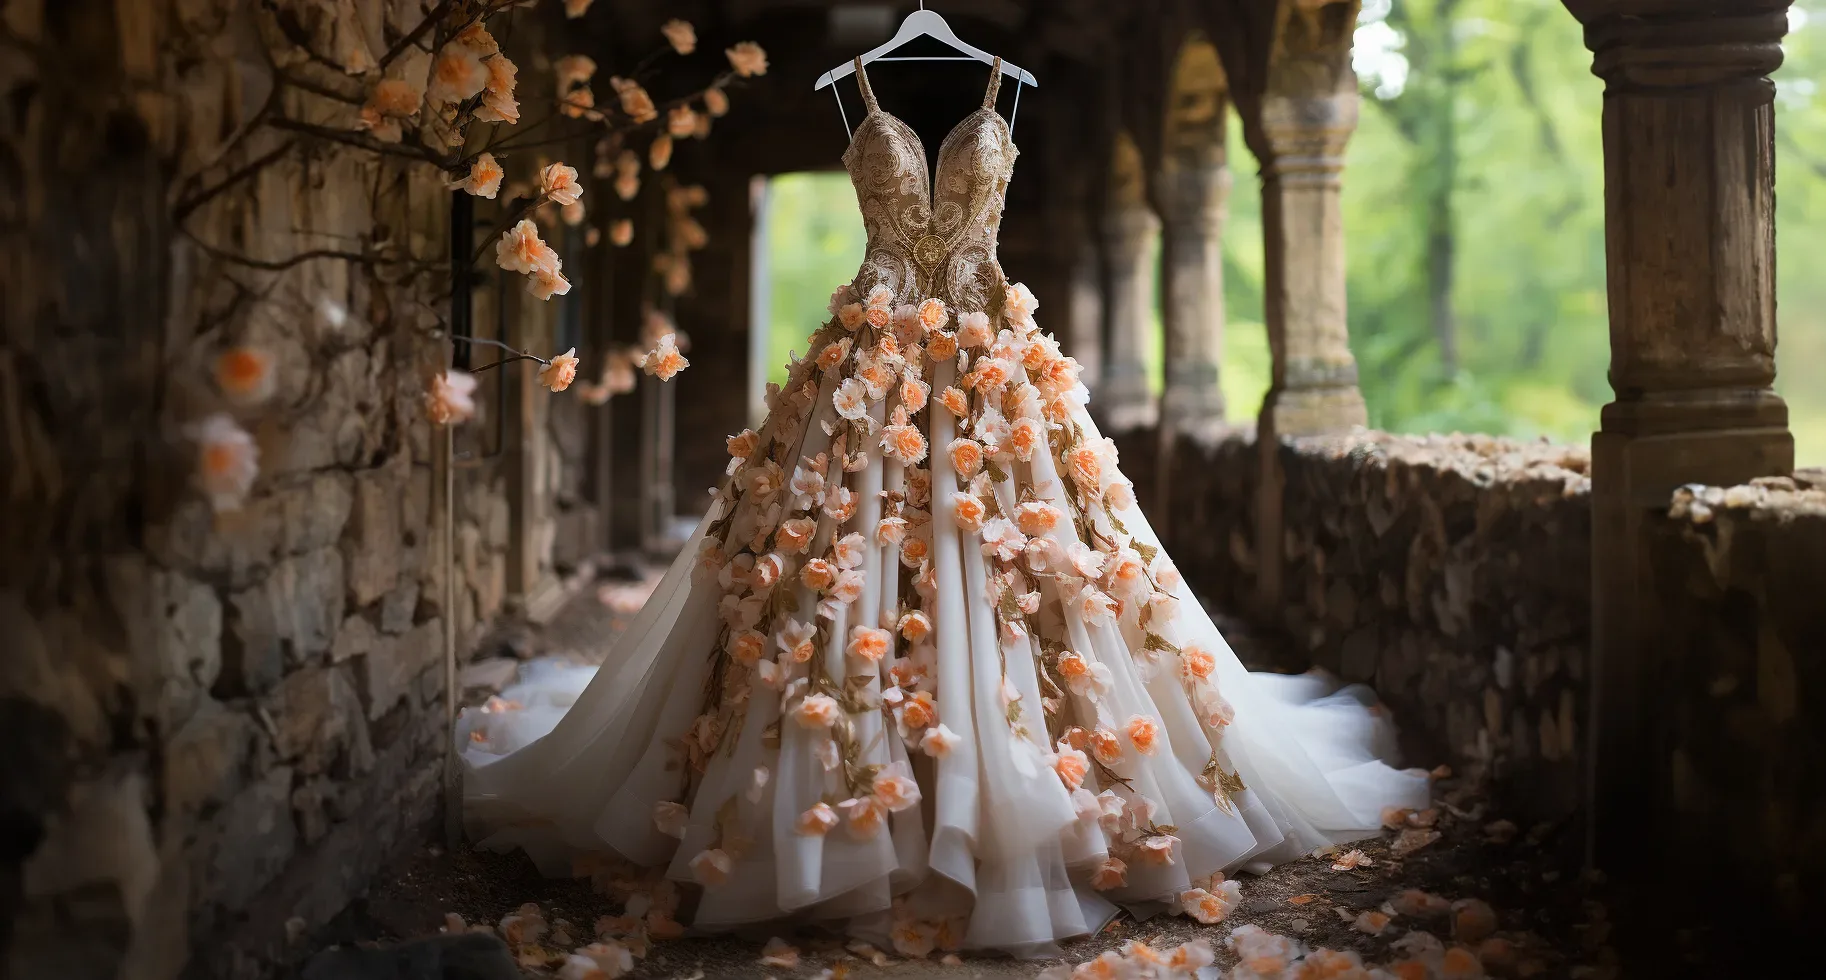 A wedding dress hangs in an archway with flowers on it. Eco Friendly Wedding Dress